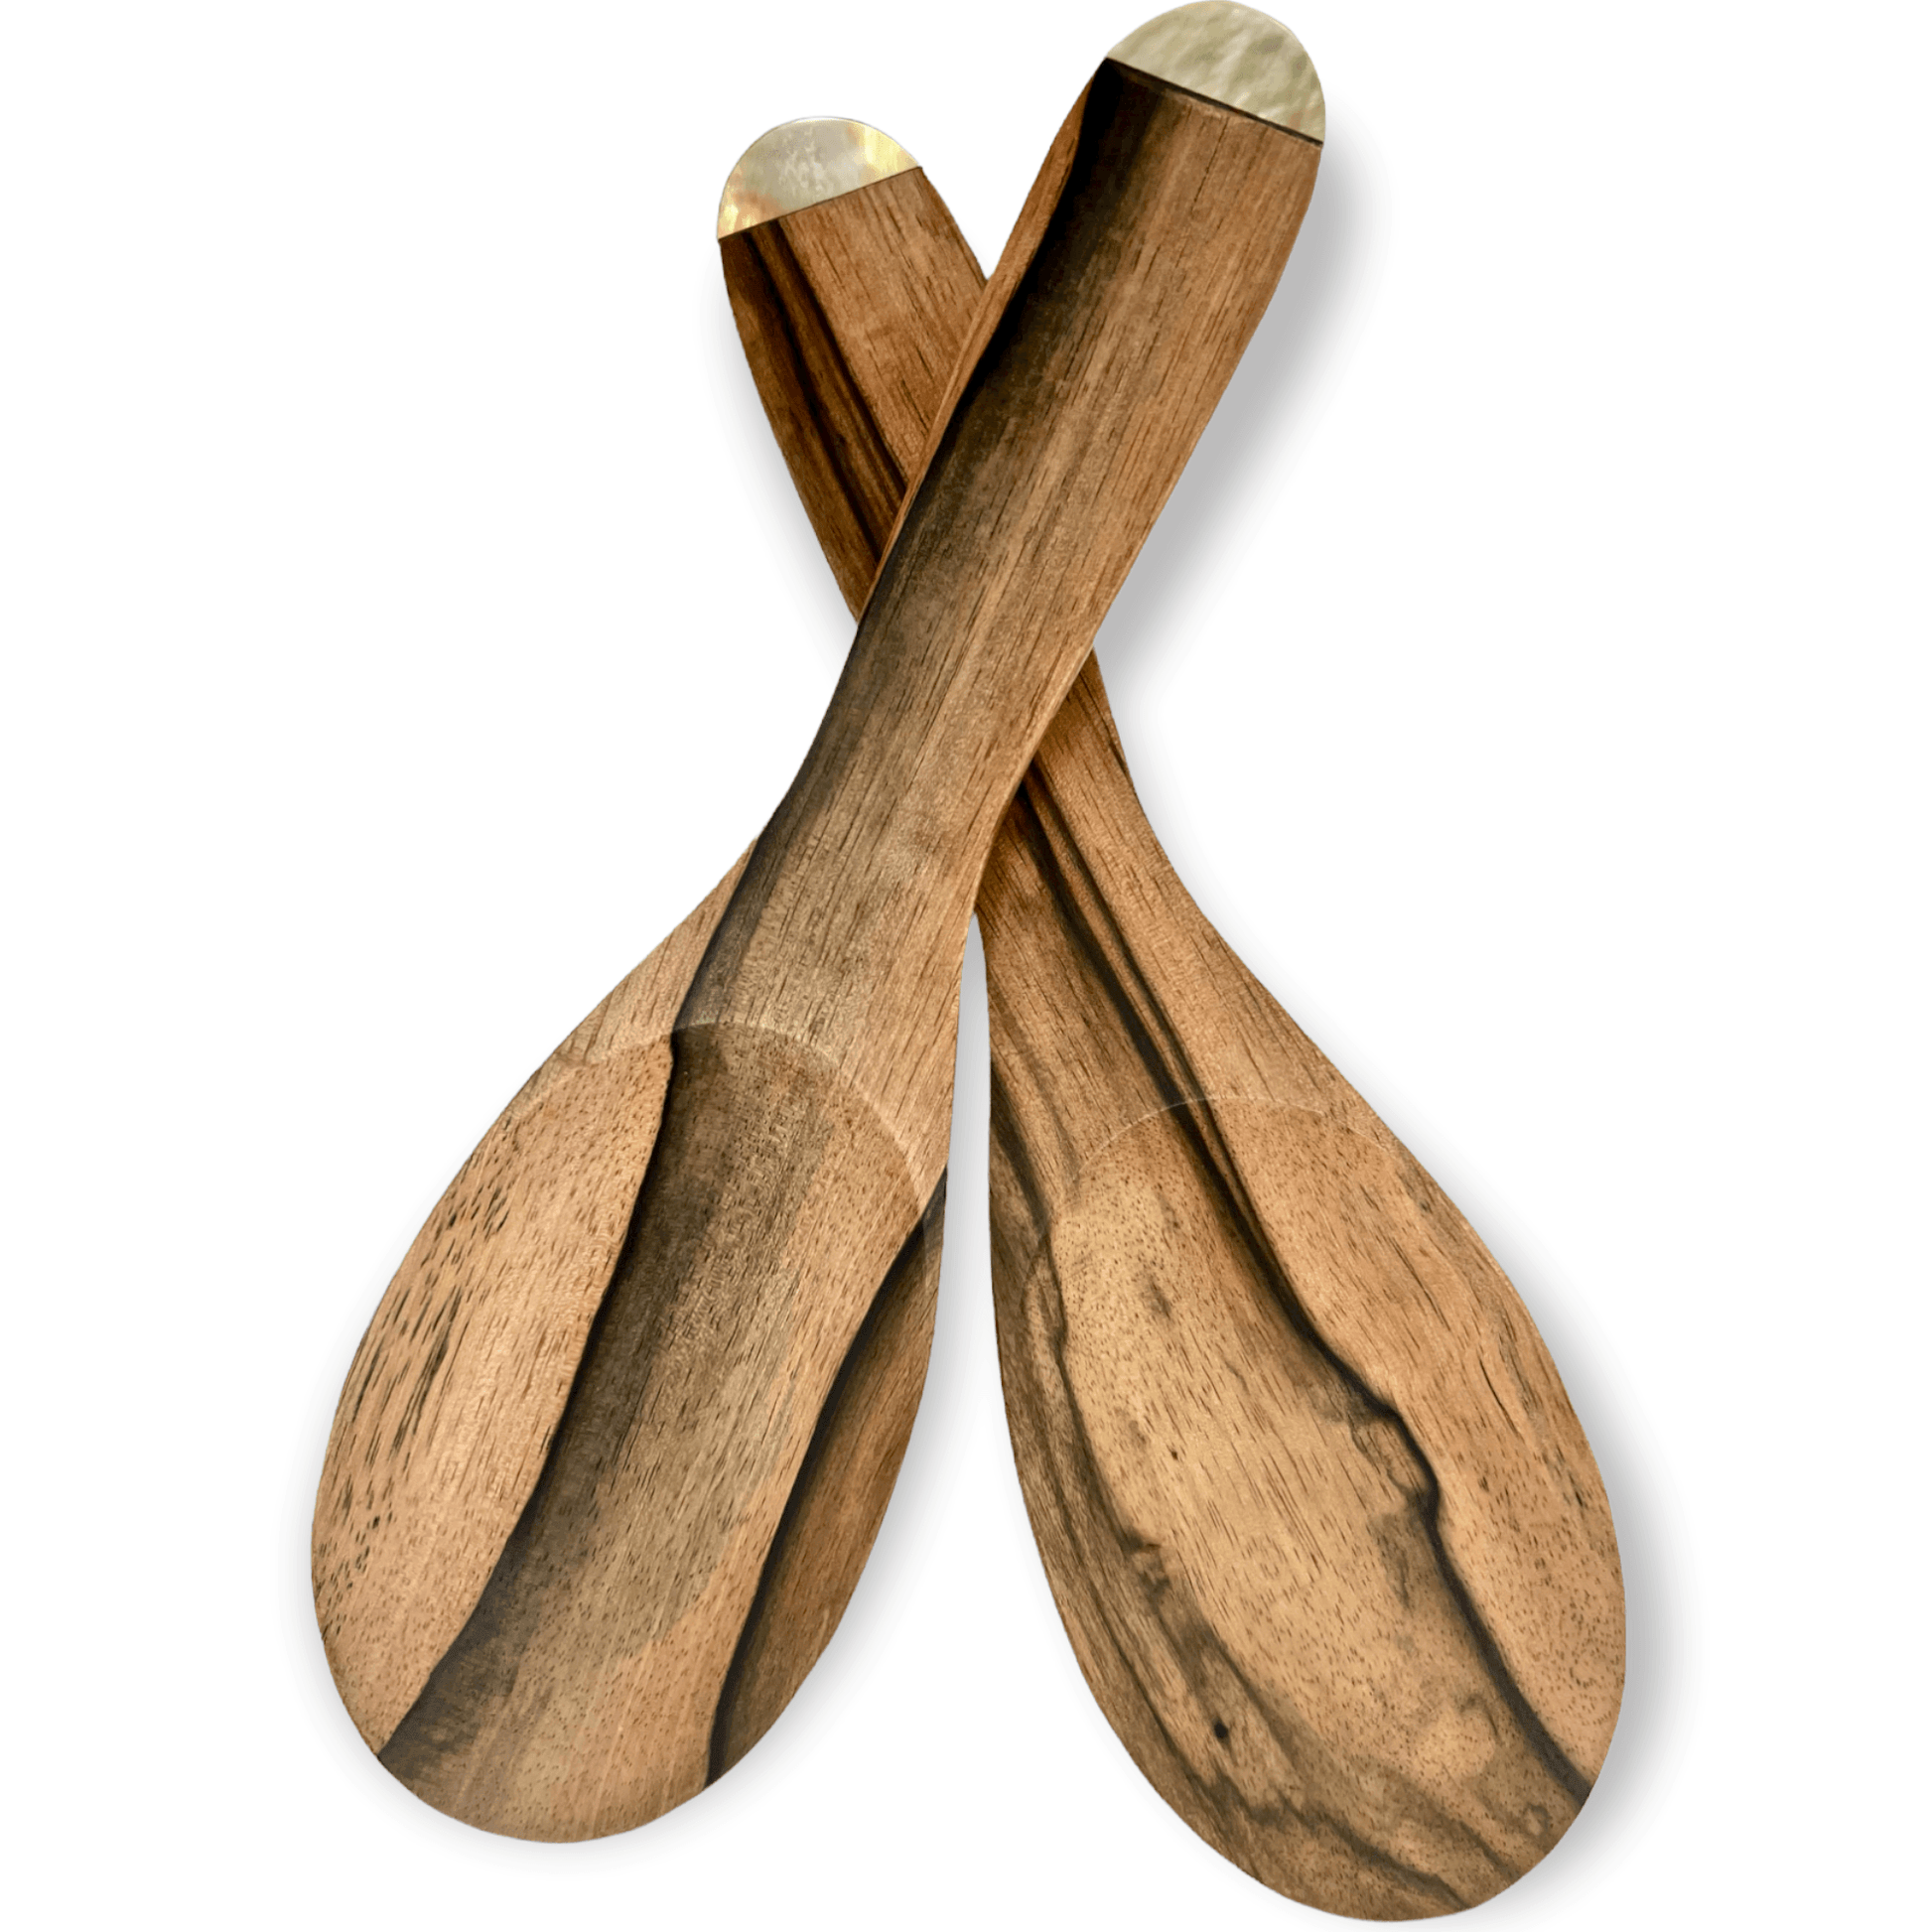 Handmade wooden serving spoons with mother of pearl tips - Sundara Joon